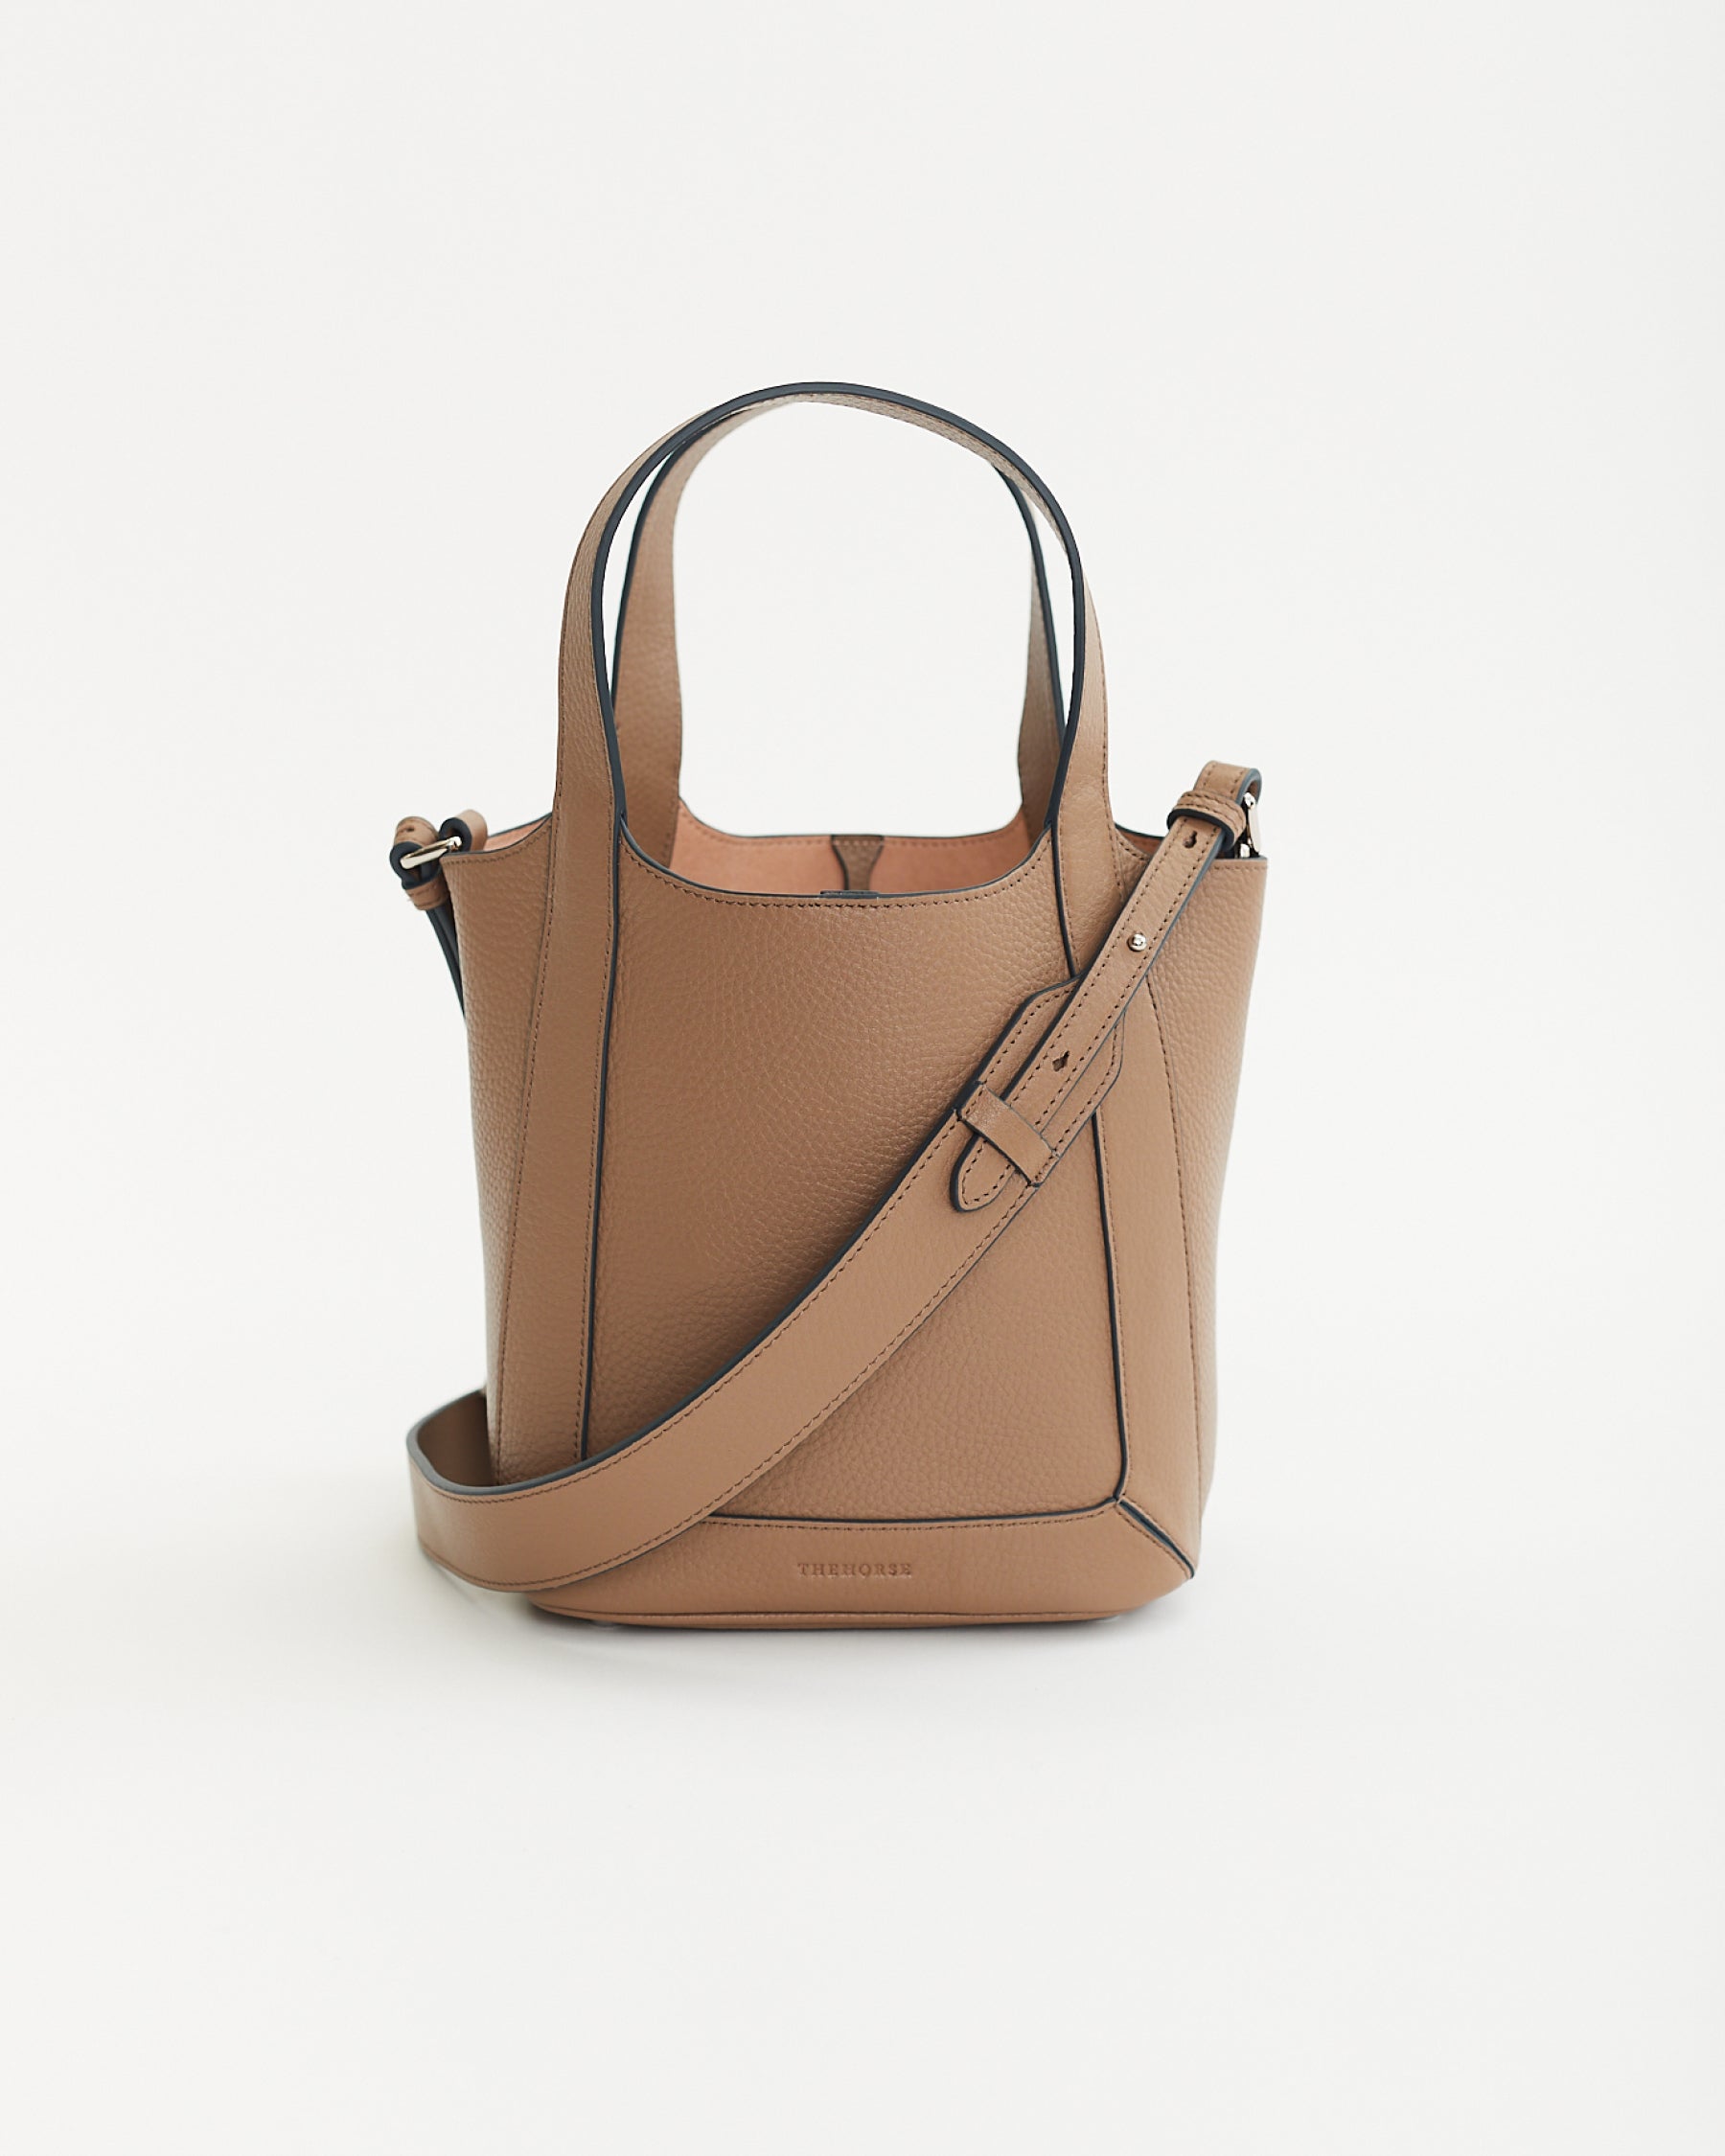 Alexie Tote: Taupe Pebbled Leather